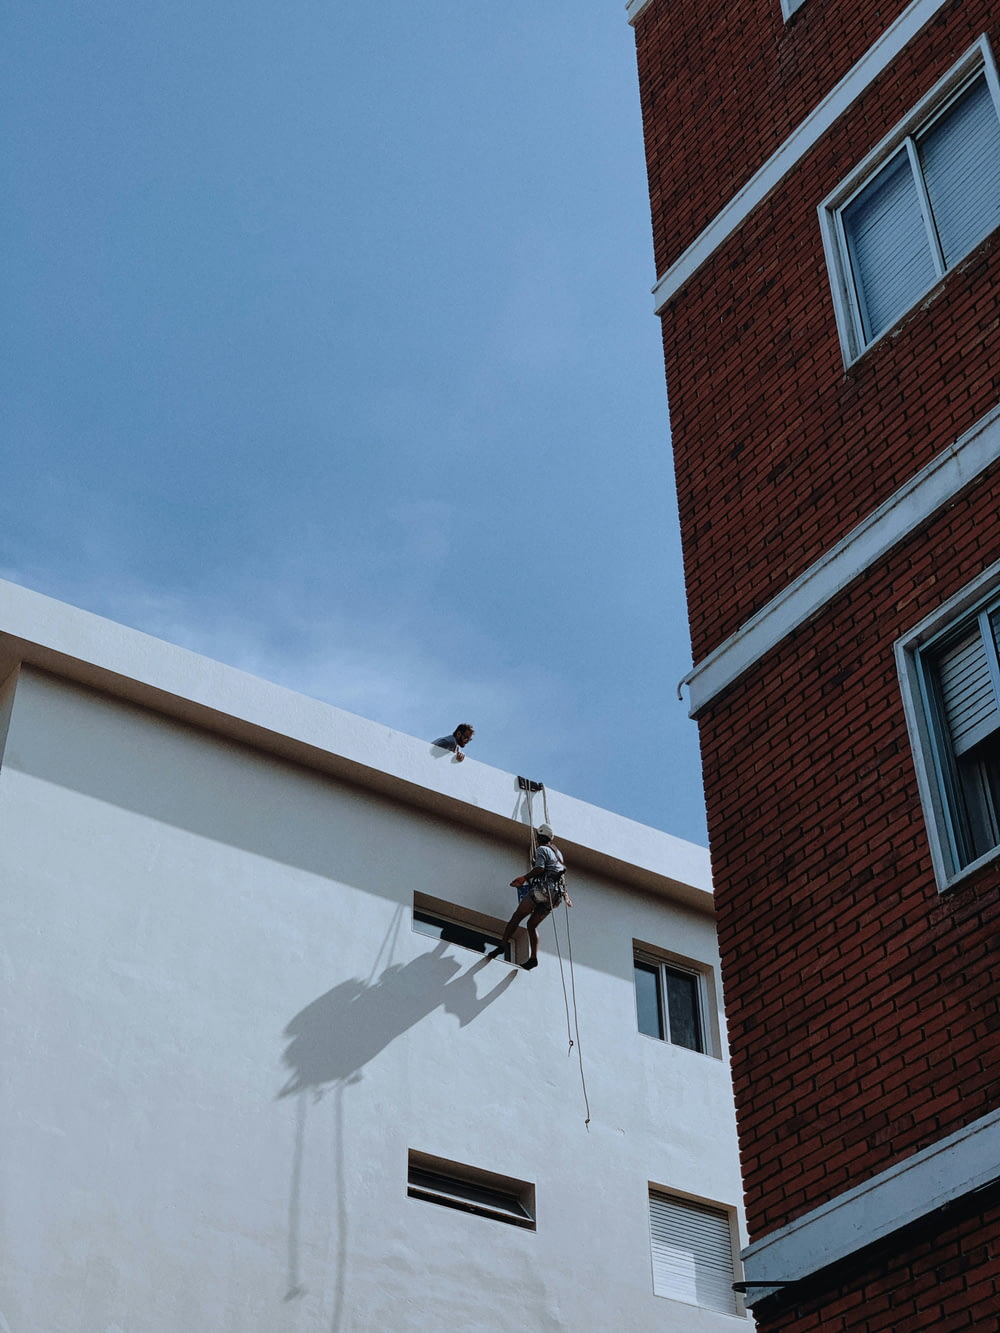 a bird is perched on the side of a building